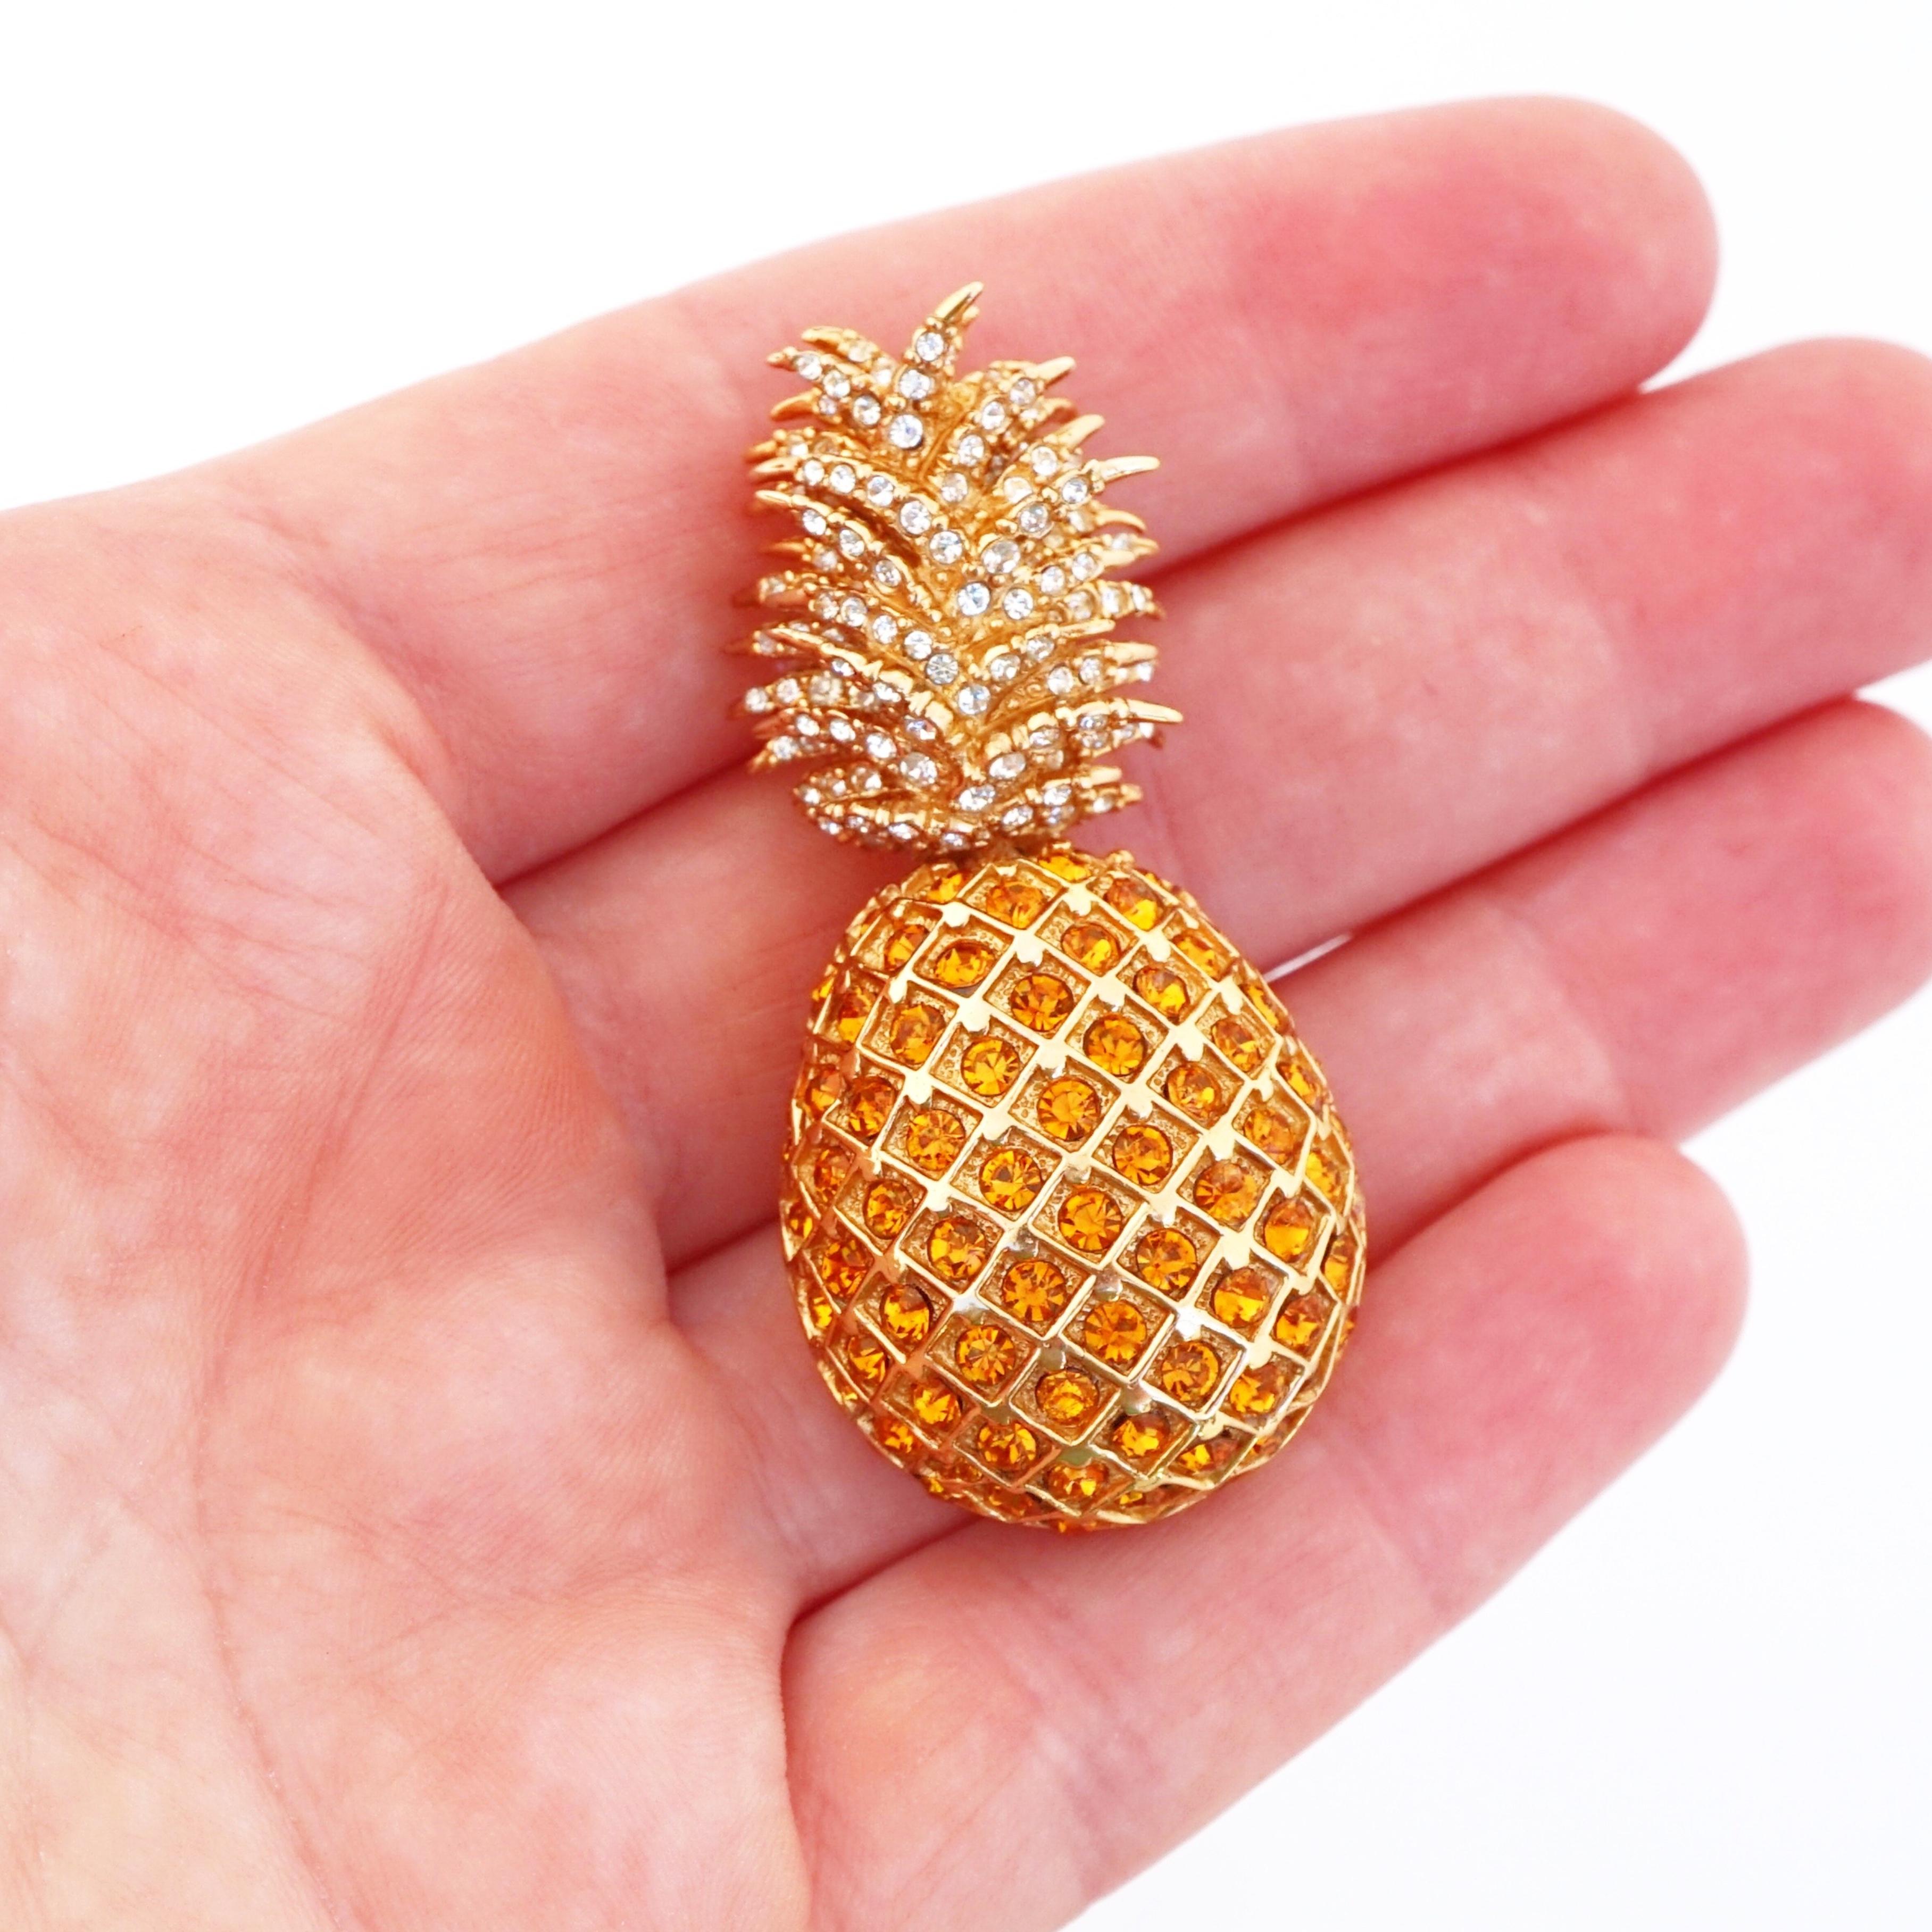 Women's Gilded Pineapple Brooch With Topaz Crystals By Ciner, 1980s